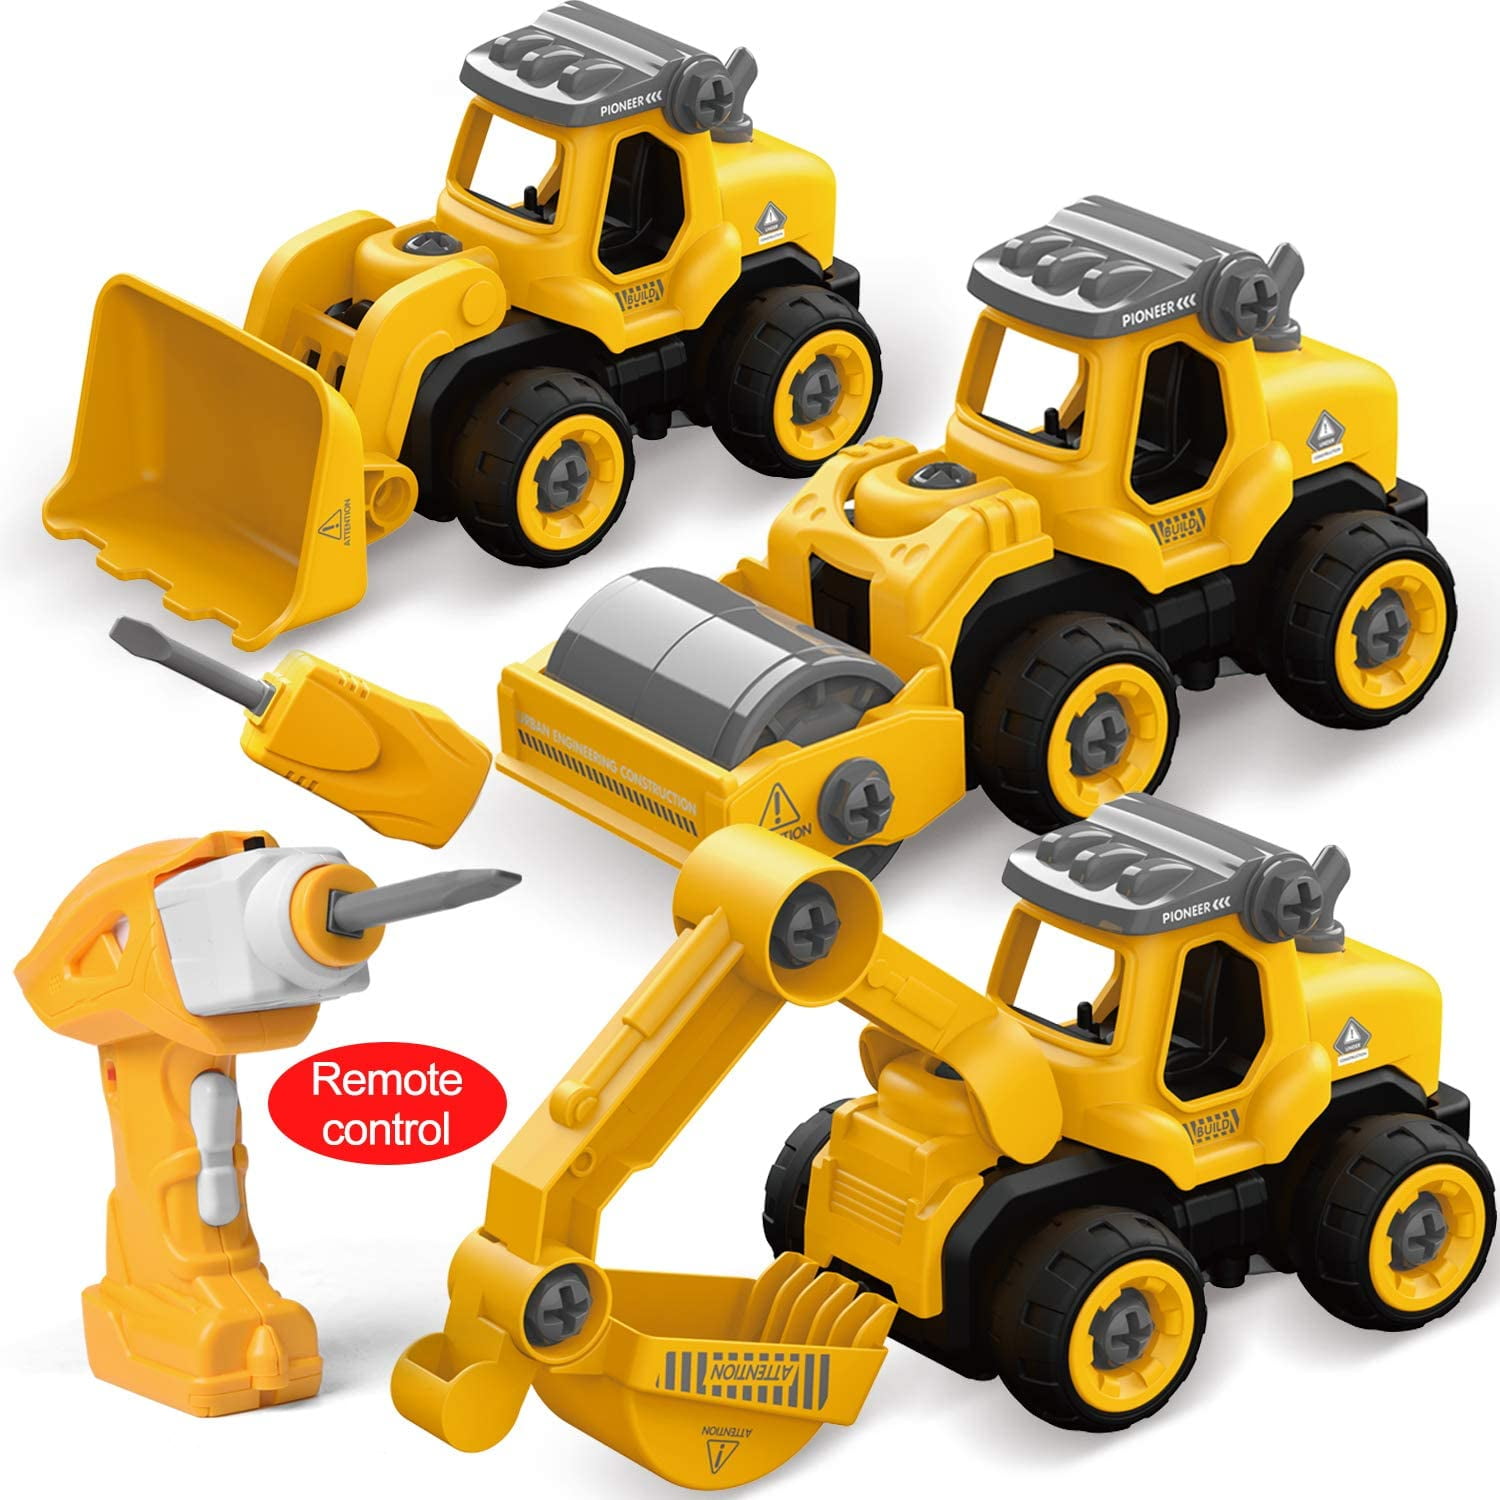 battery operated toy Assembly Apart Car Construction Toys Kit tools Sound boys 